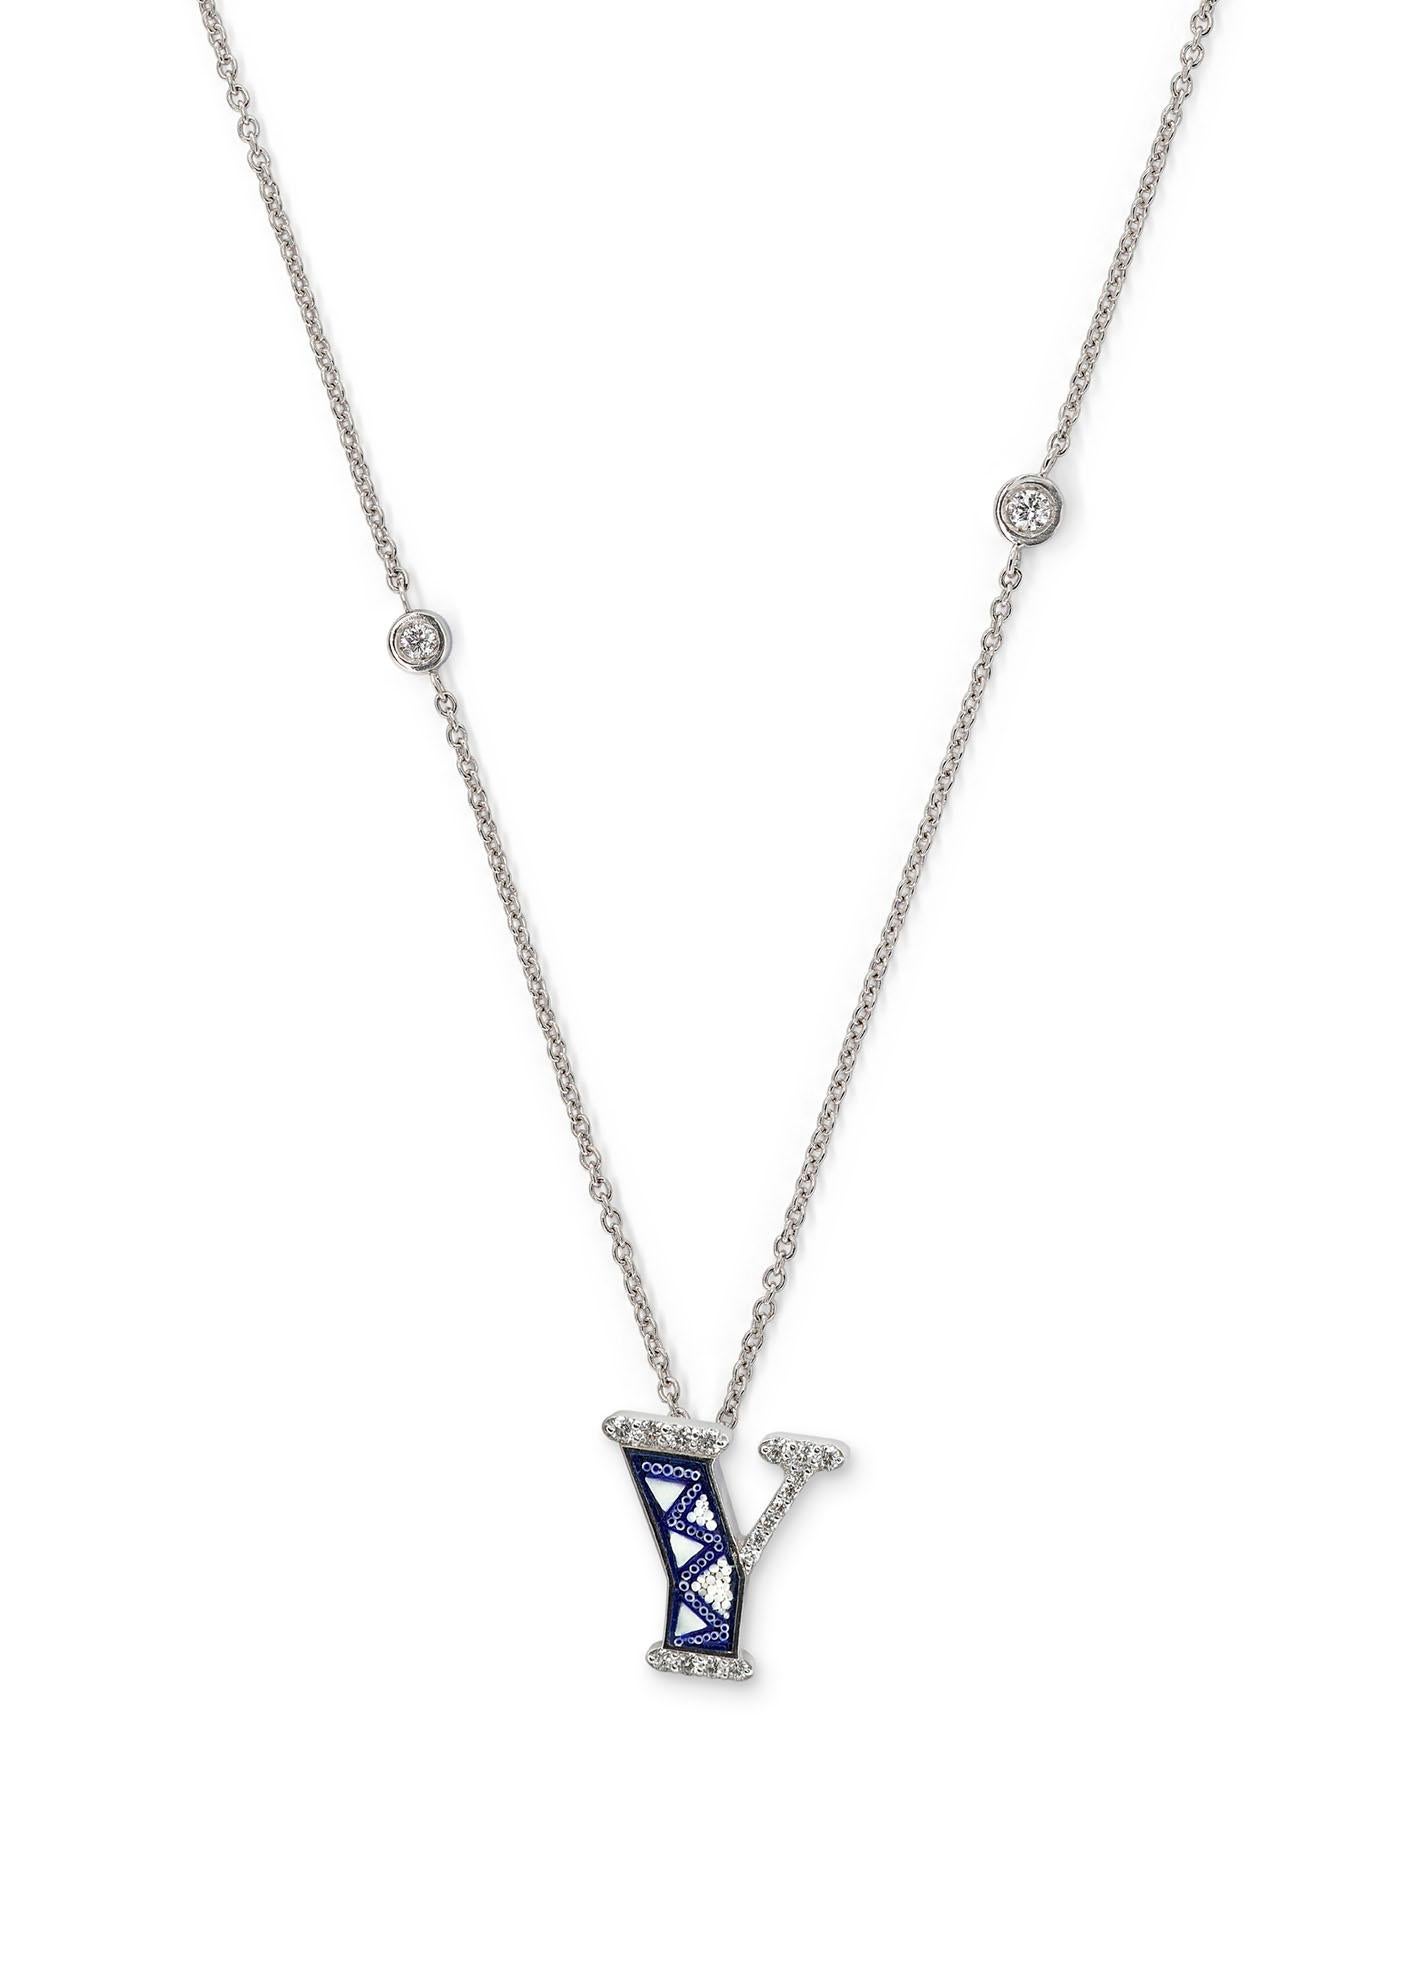 Contemporary Necklace Letter Y White Gold White Diamonds Hand Decorated with Micromosaic For Sale